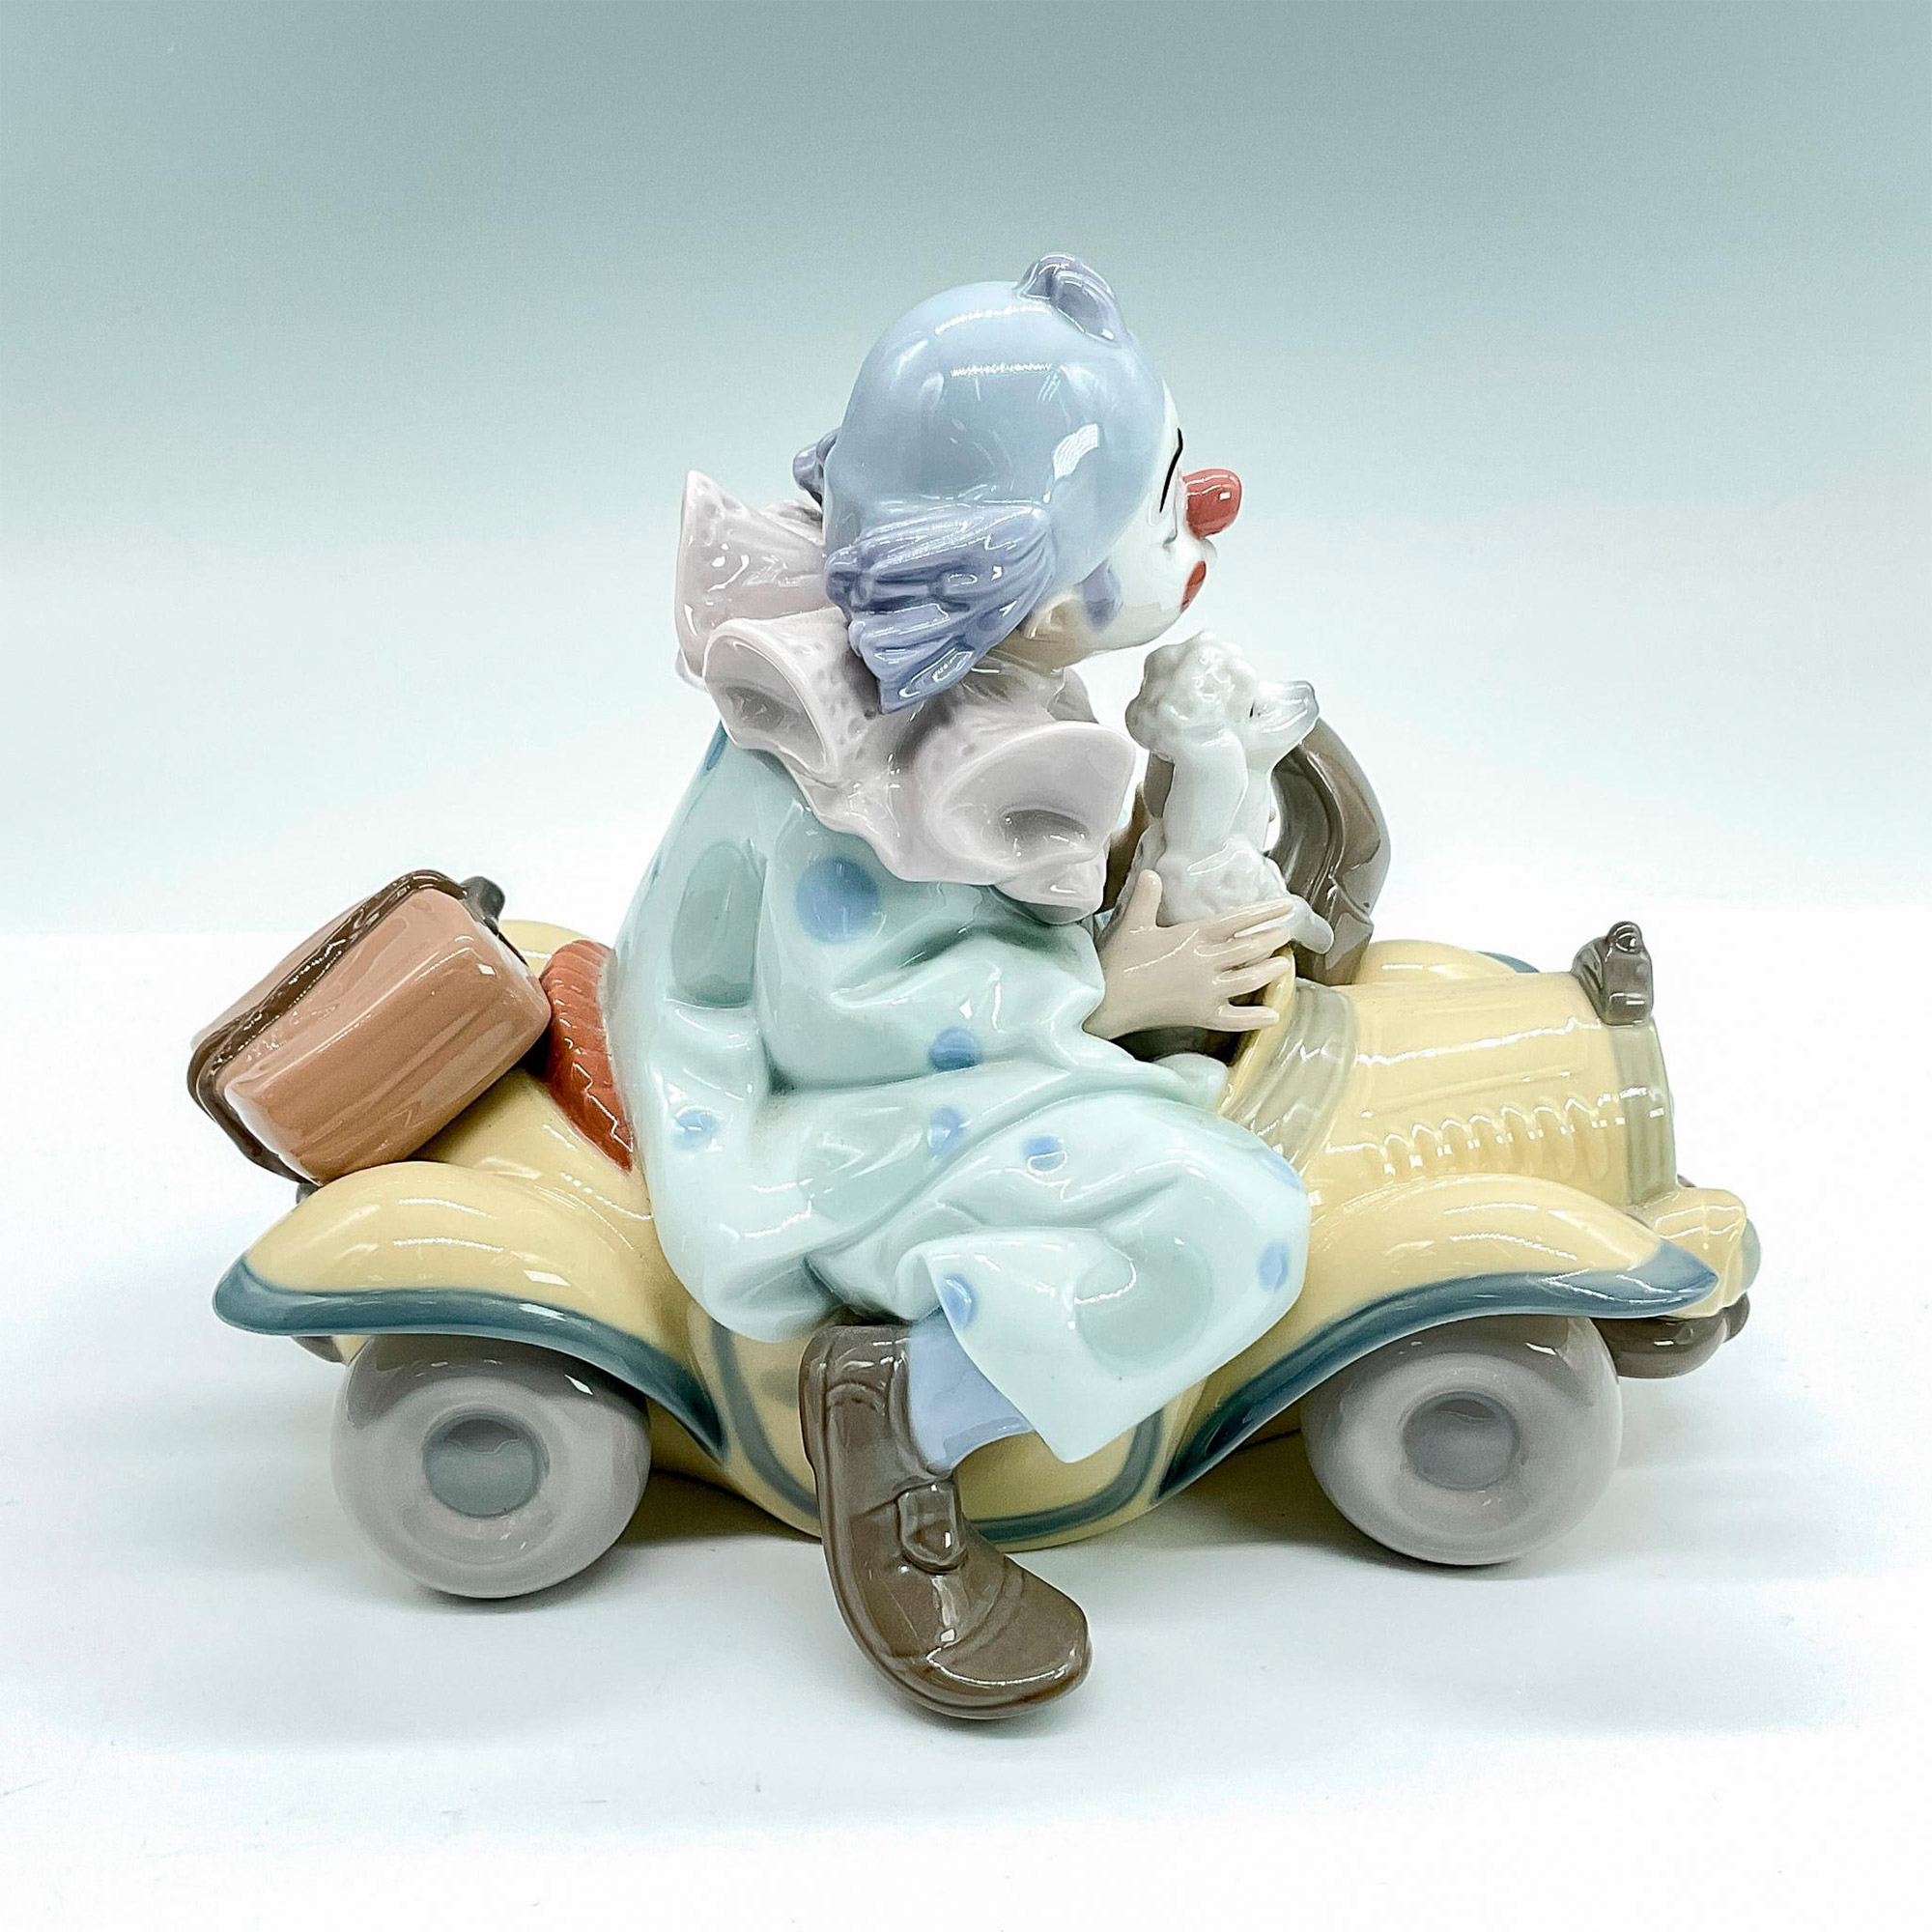 Trip To The Circus 1008136 - Lladro Porcelain Figurine - Image 2 of 4